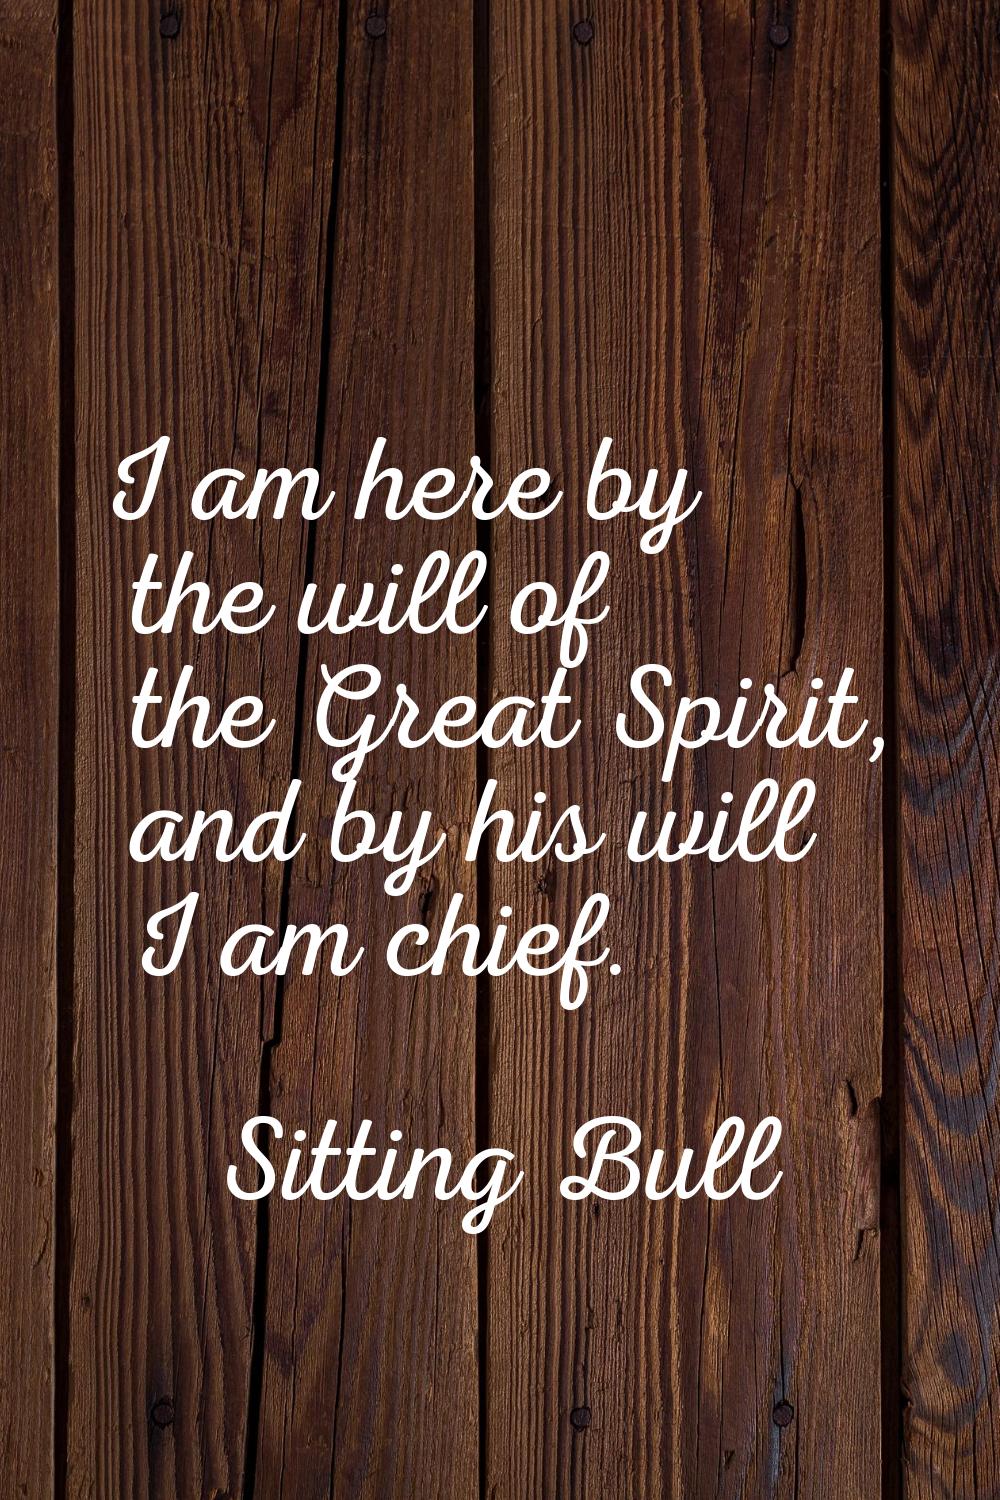 I am here by the will of the Great Spirit, and by his will I am chief.